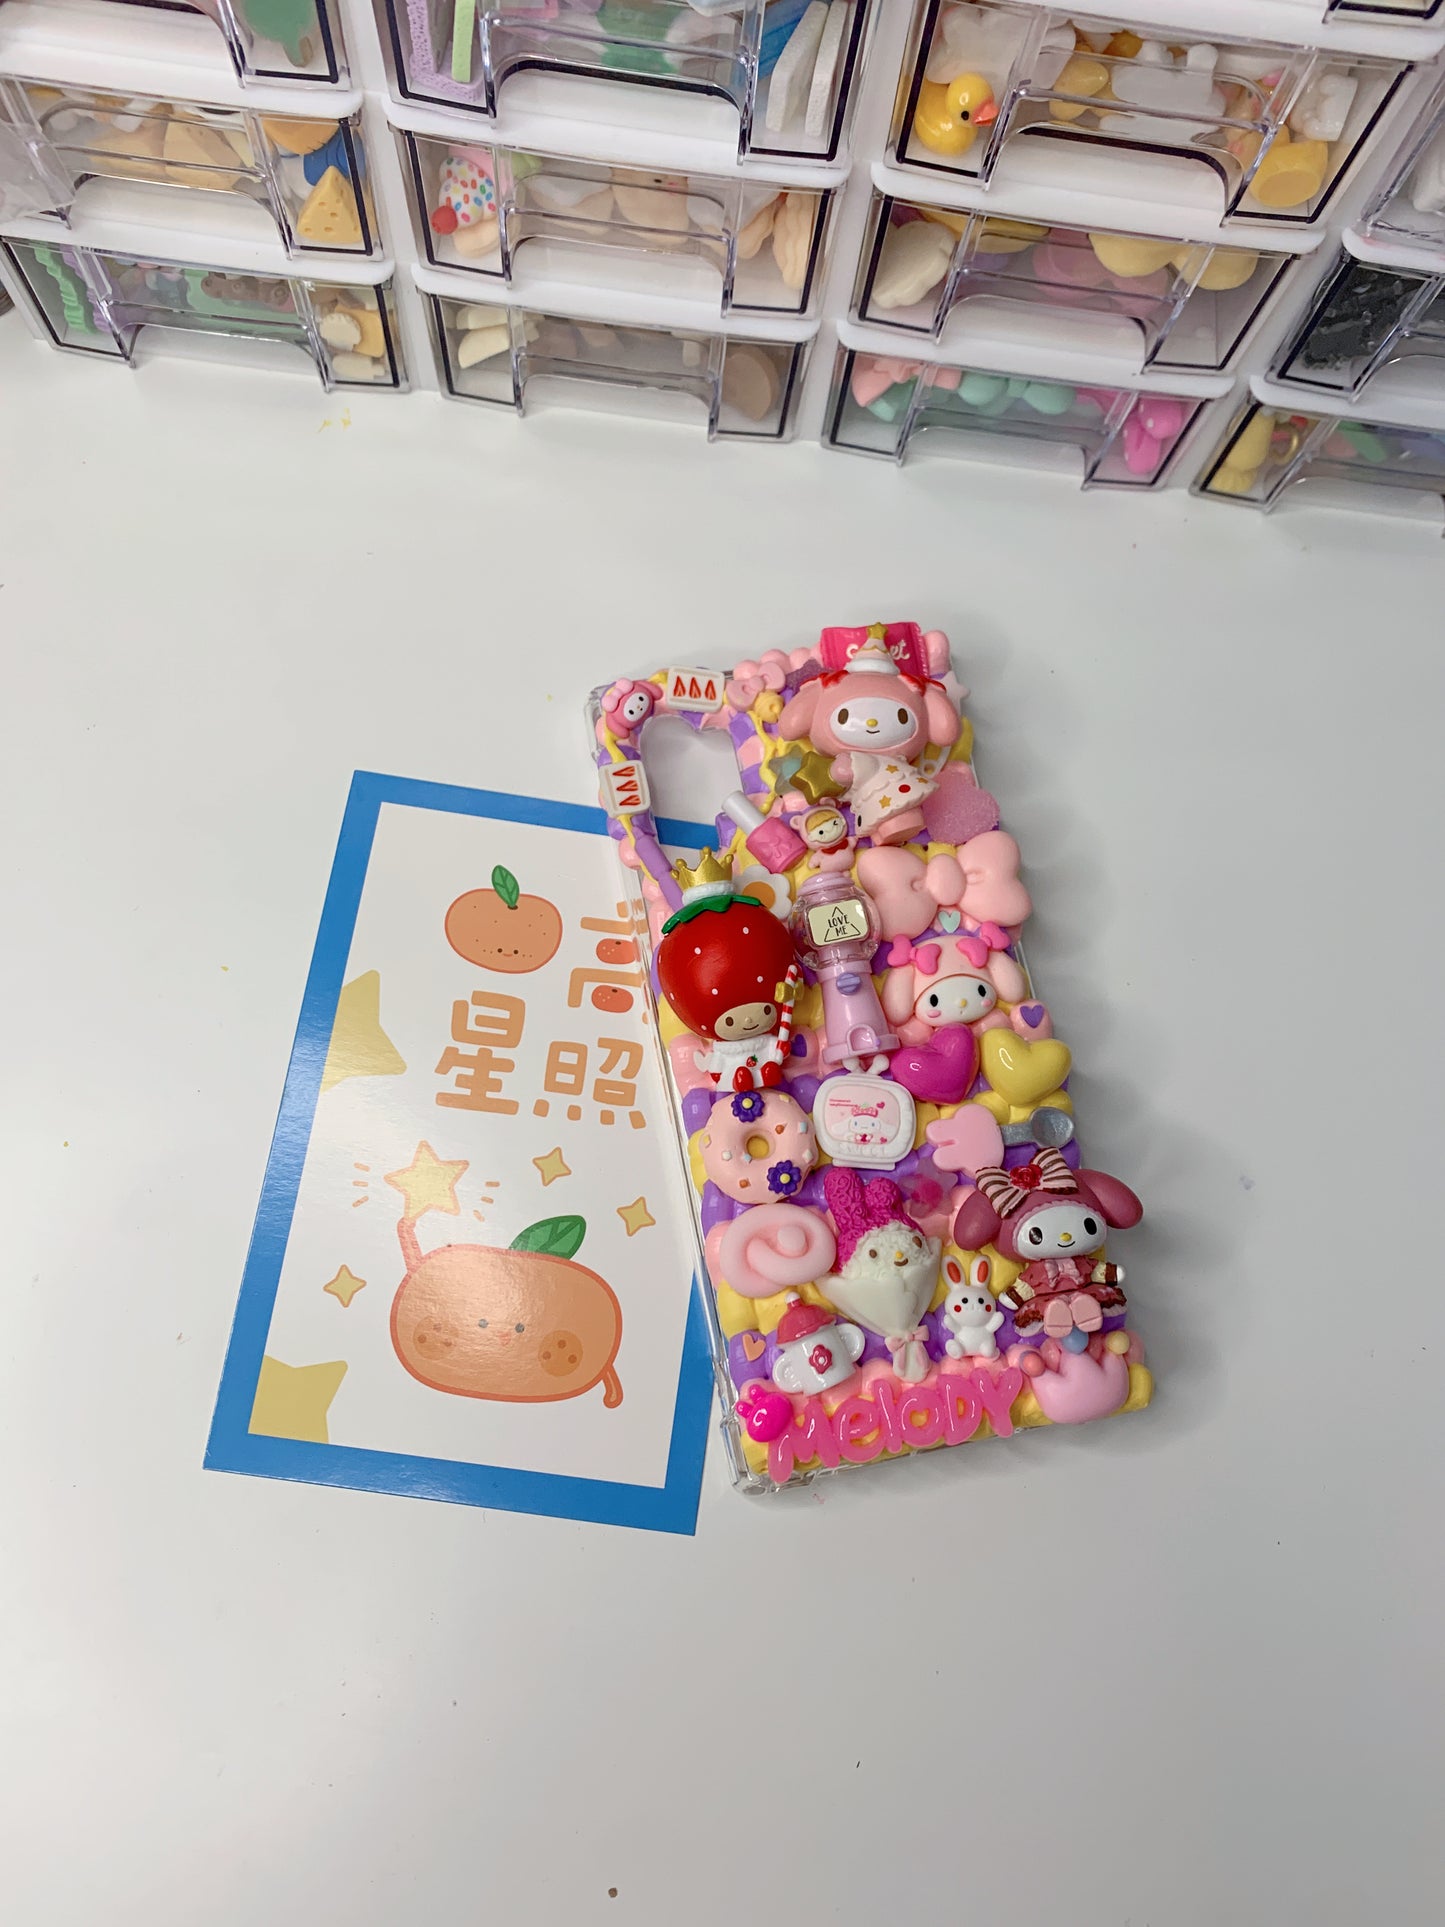 Sanrio Kuromi MyMelody Whipped cream phone cases,cute phone case, diycases, custommade case,3D Anime Phone cover, Kawaii Whip Cream Case,Melody Phone accessories